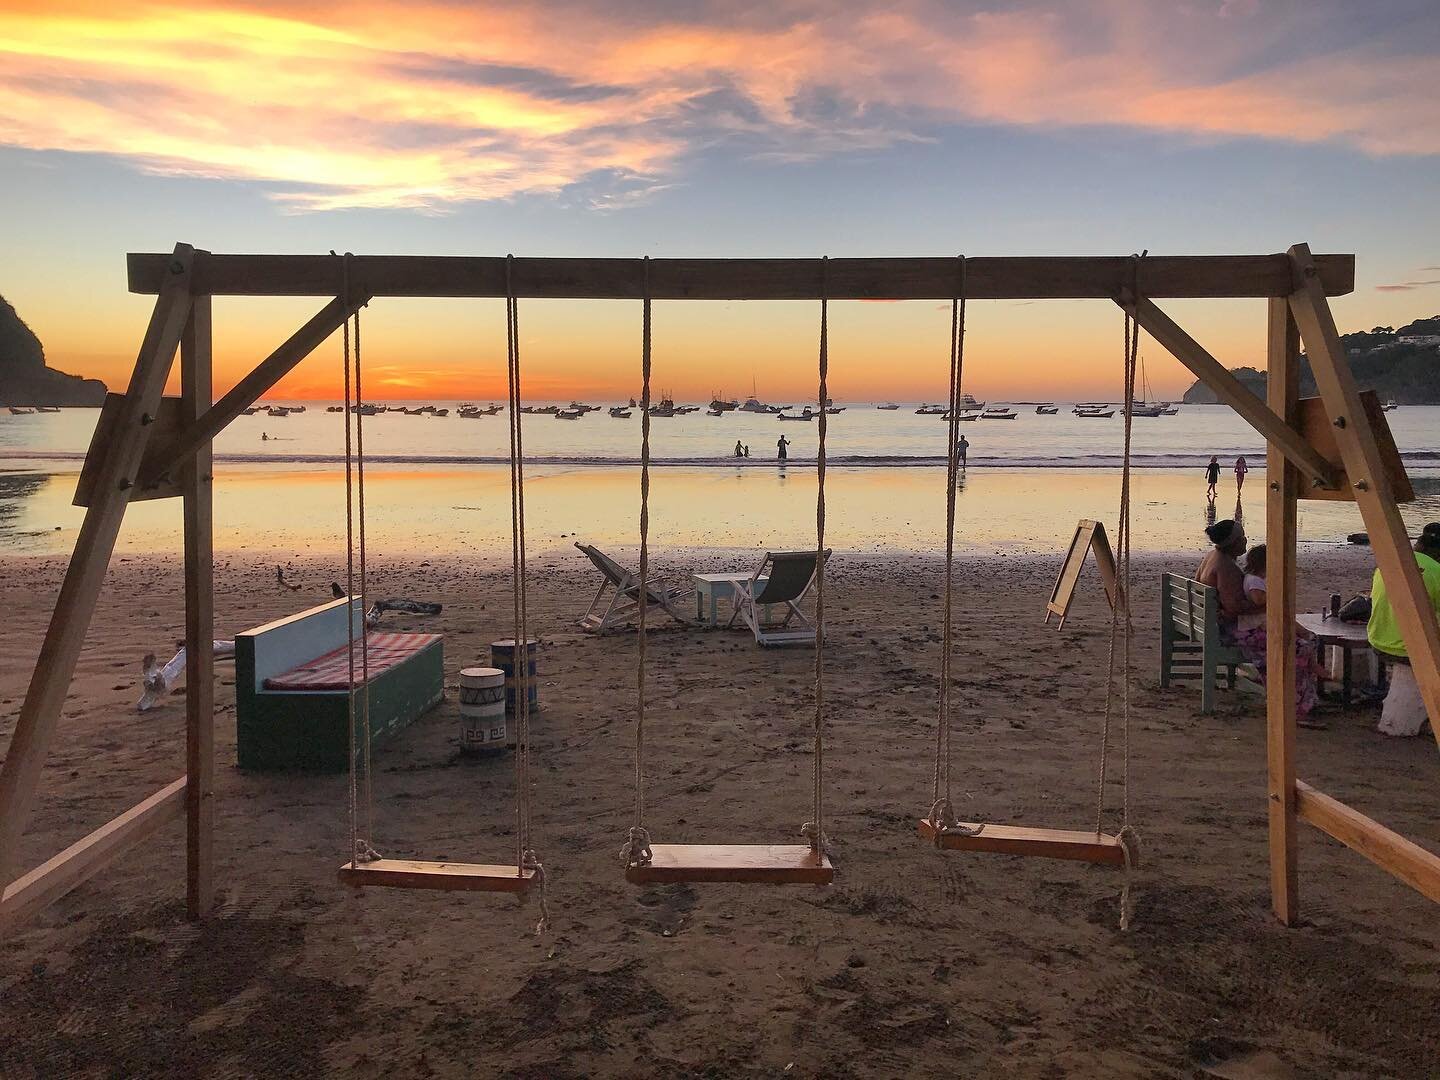 Come check out our new beach-front swing set 🌴 Enjoy a cocktail, delicious food &amp; a beautiful sunset 🥰🍹🍤
Open Thursdays 4-10pm Fridays 11am-10pm Saturday &amp; Sundays 9am-10pm #sanjuandelsur #sjds #nicaragua #playa #seafood #beachfront #sush